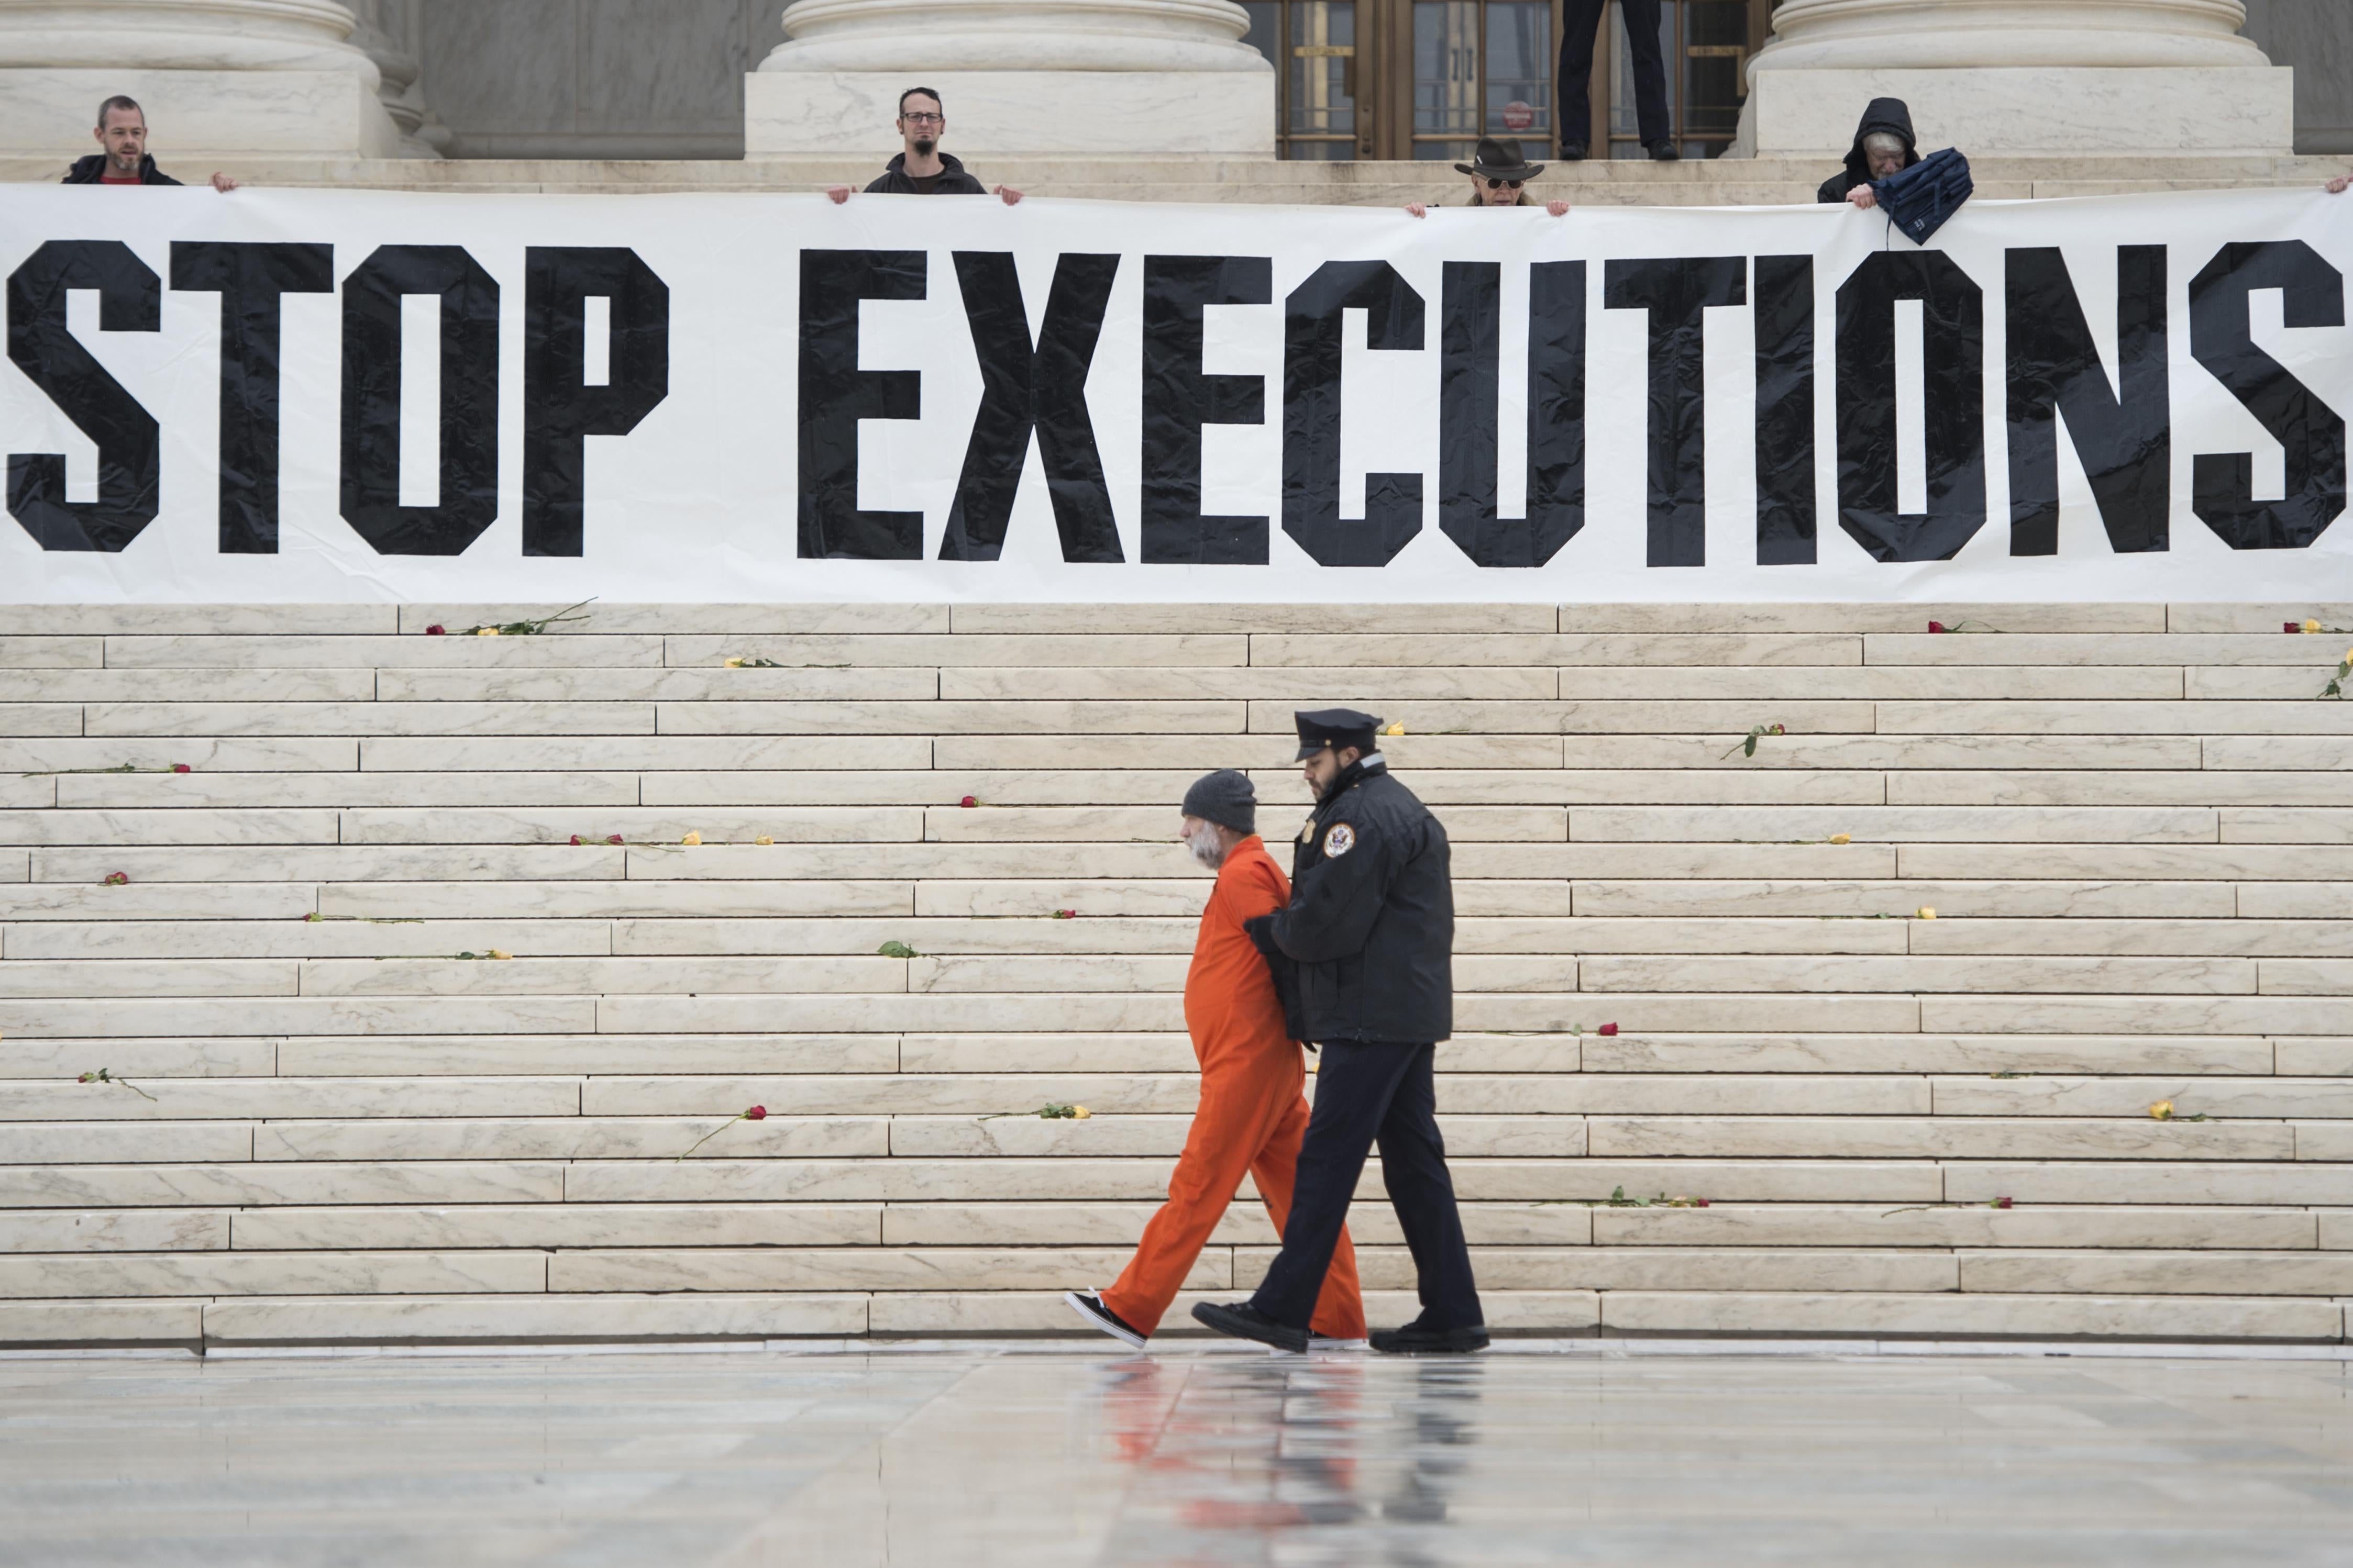 Death penalty protesters unveil a "Stop Executions" banner on the steps of the Supreme Court.